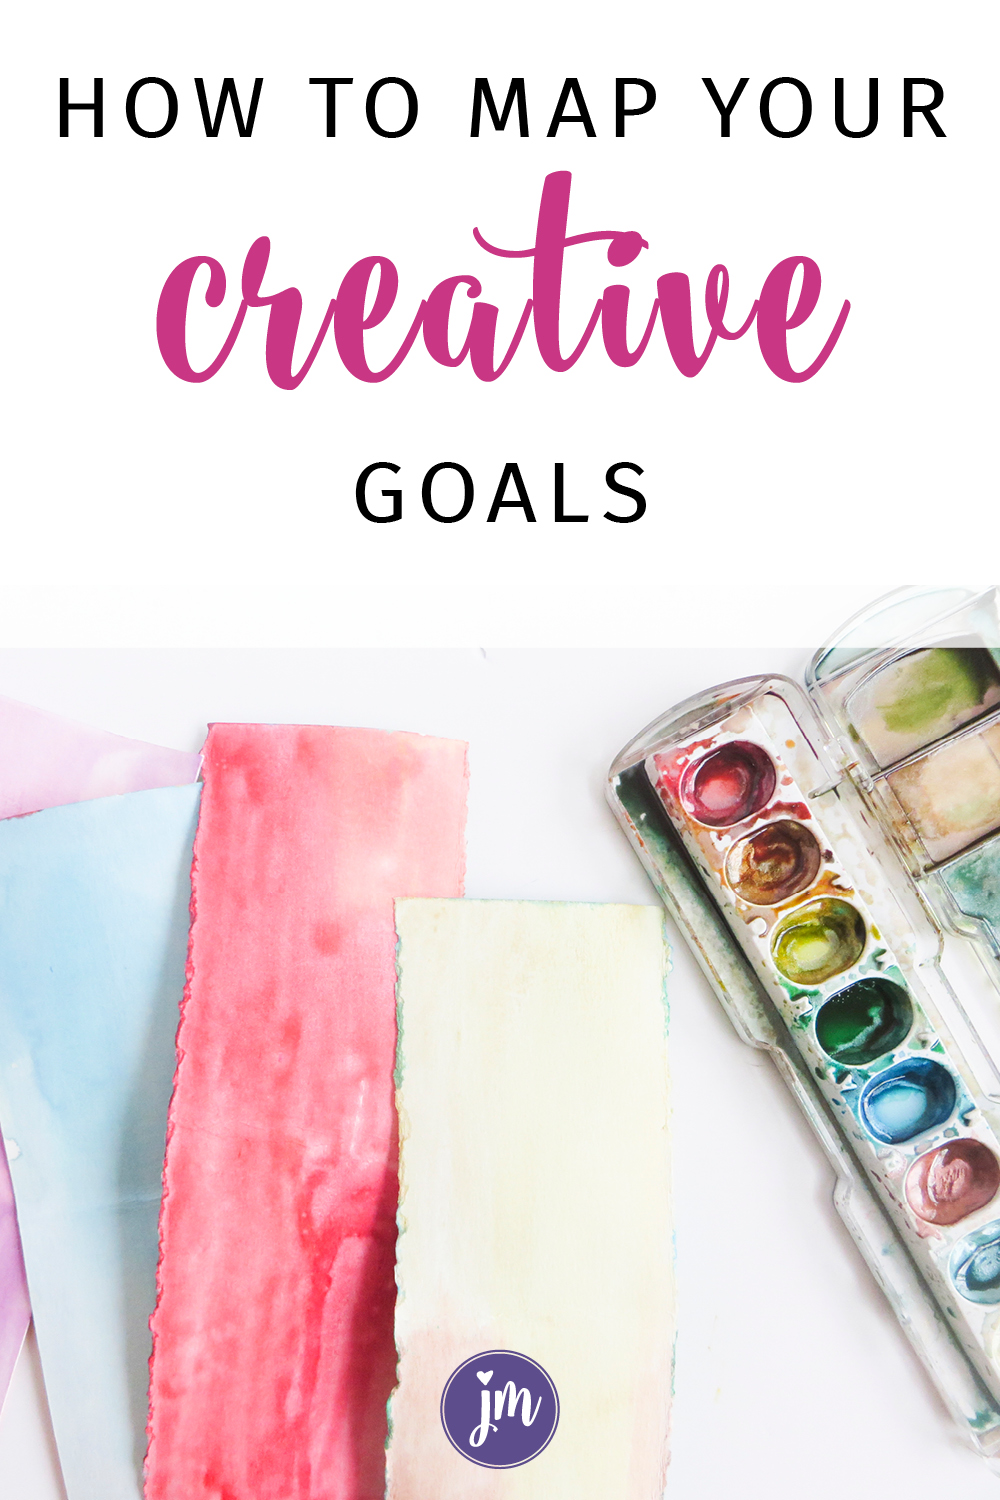 How to Make a Goal Map for Creatives